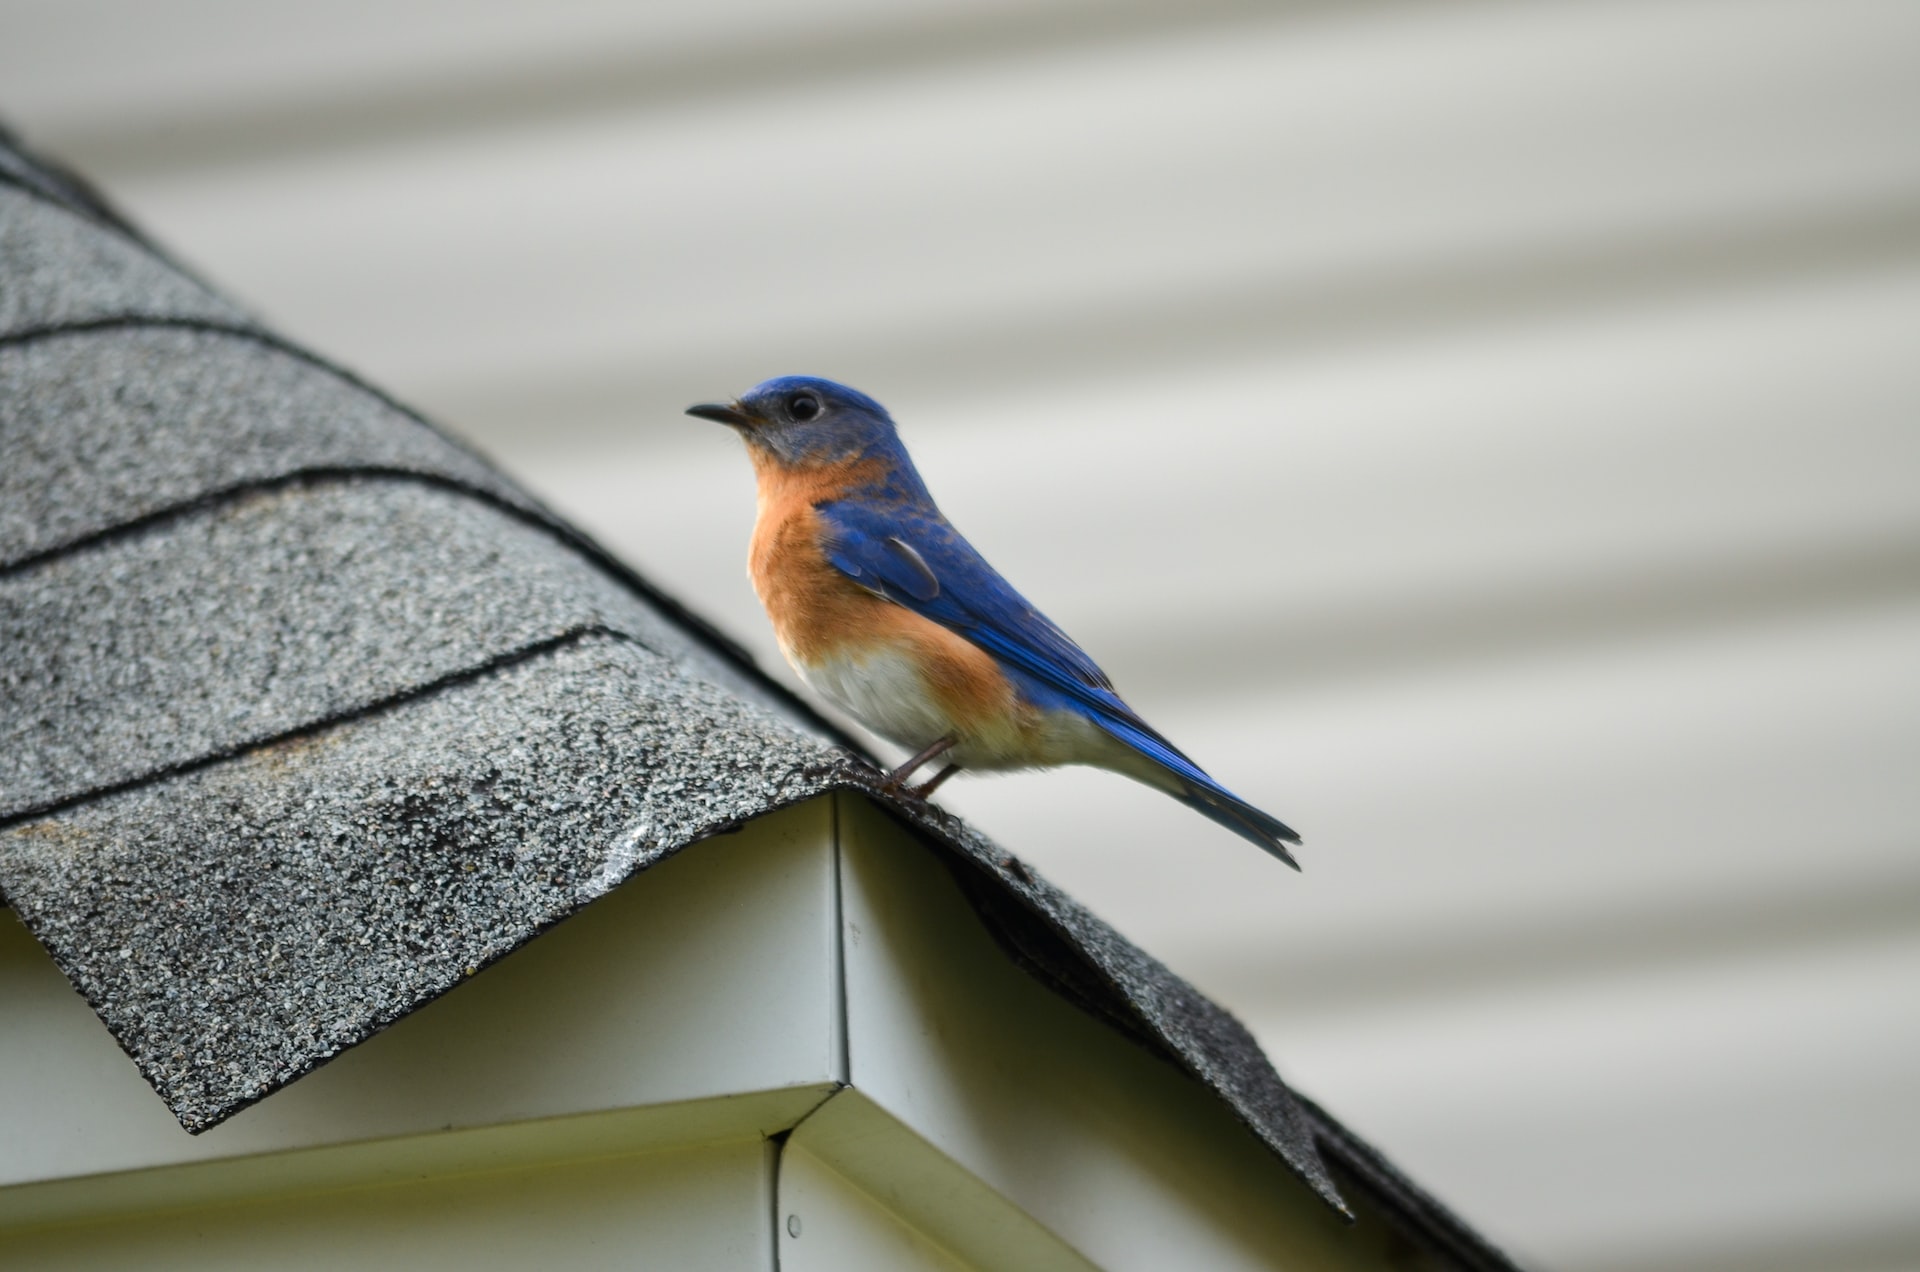 A blue and orange bird on a roof